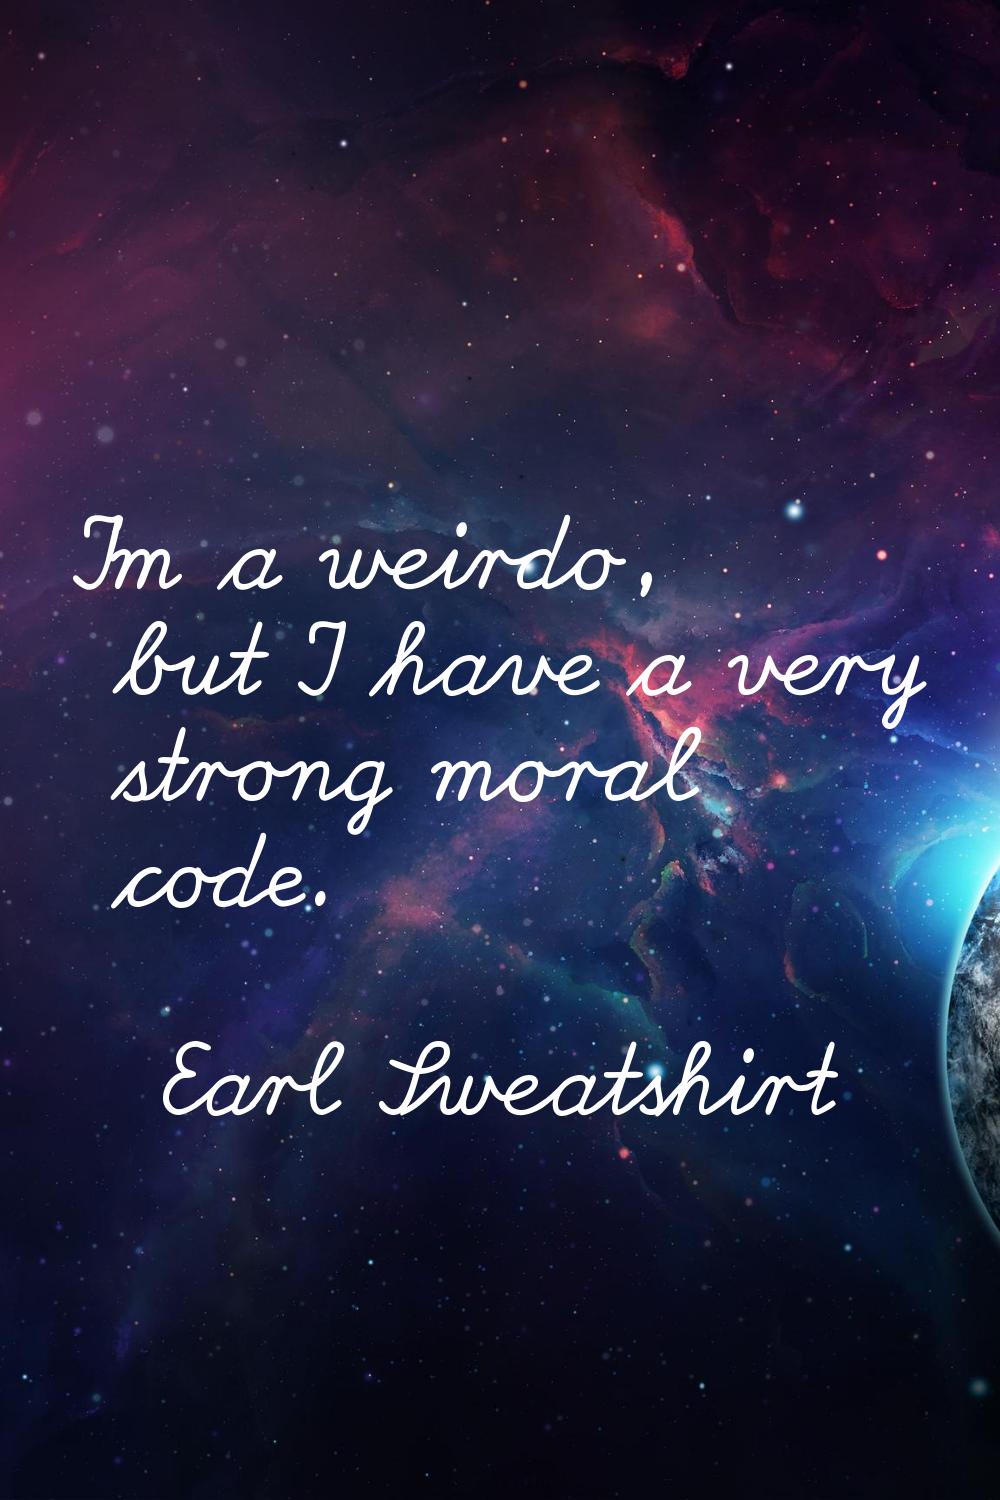 I'm a weirdo, but I have a very strong moral code.